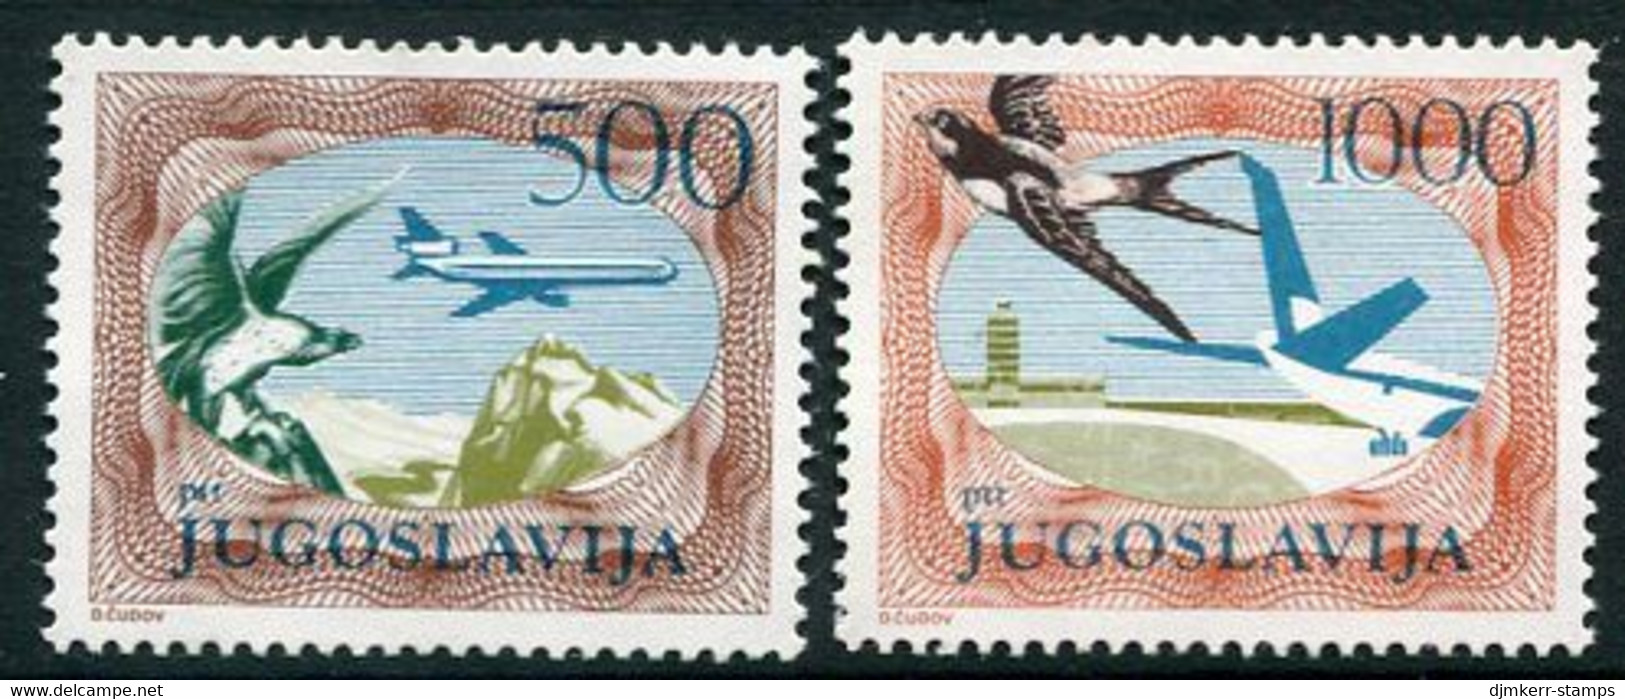 YUGOSLAVIA 1985 Airmail Definitive Perforated 12½ MNH / **.  Michel 2098-99A - Unused Stamps